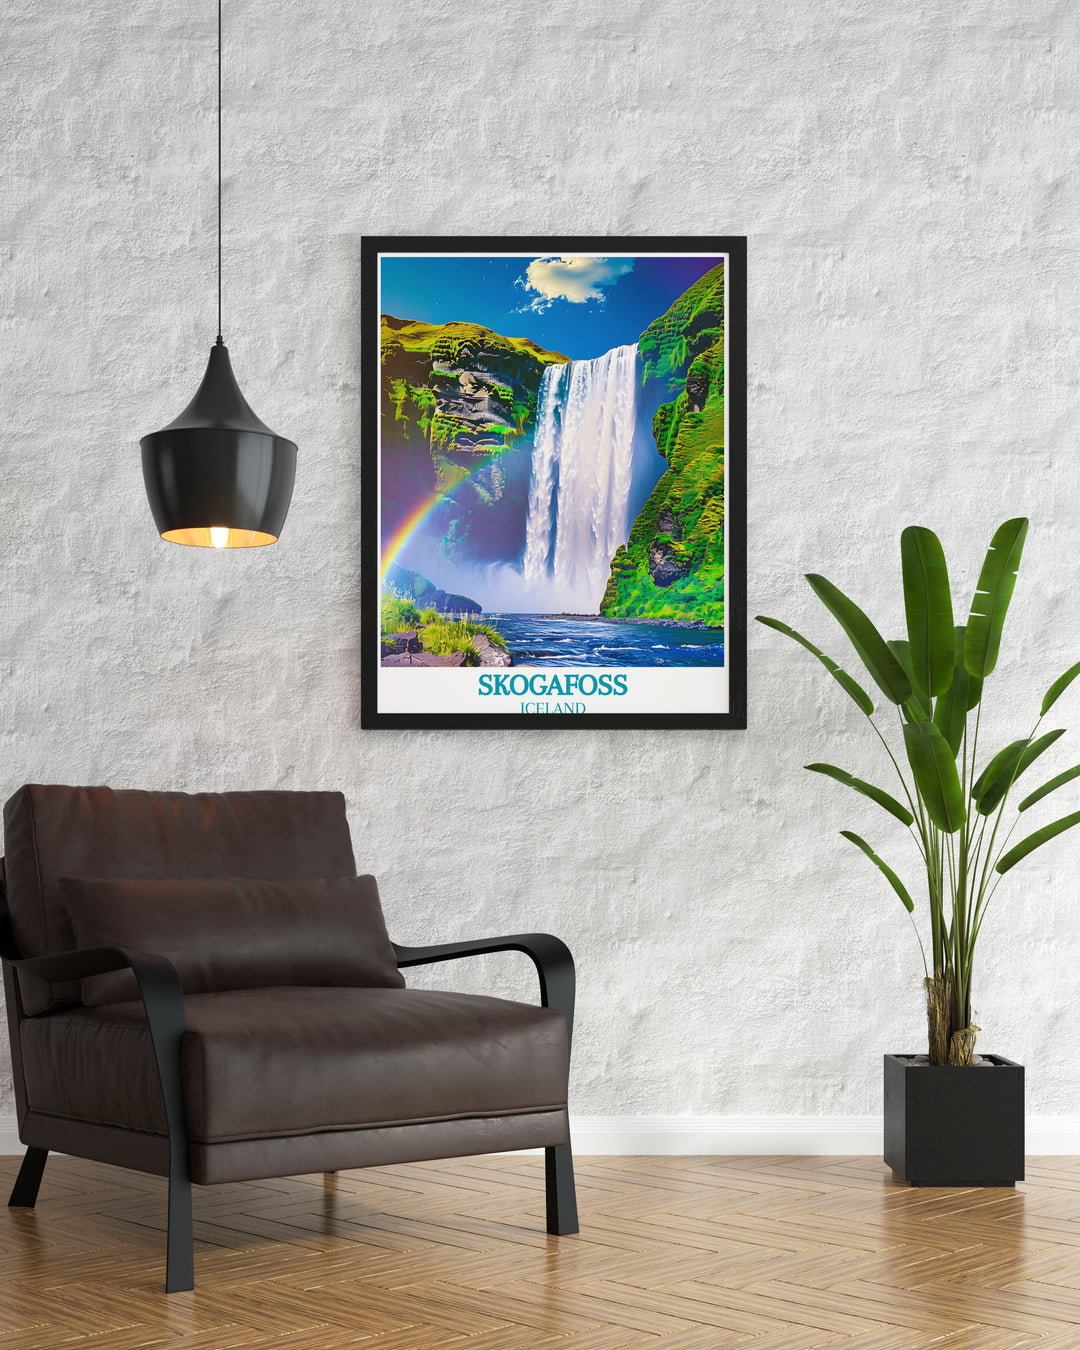 Uncover the scenic beauty of Skogafoss with this detailed art print, highlighting the waterfalls impressive drop and the vibrant colors of the rainbow.